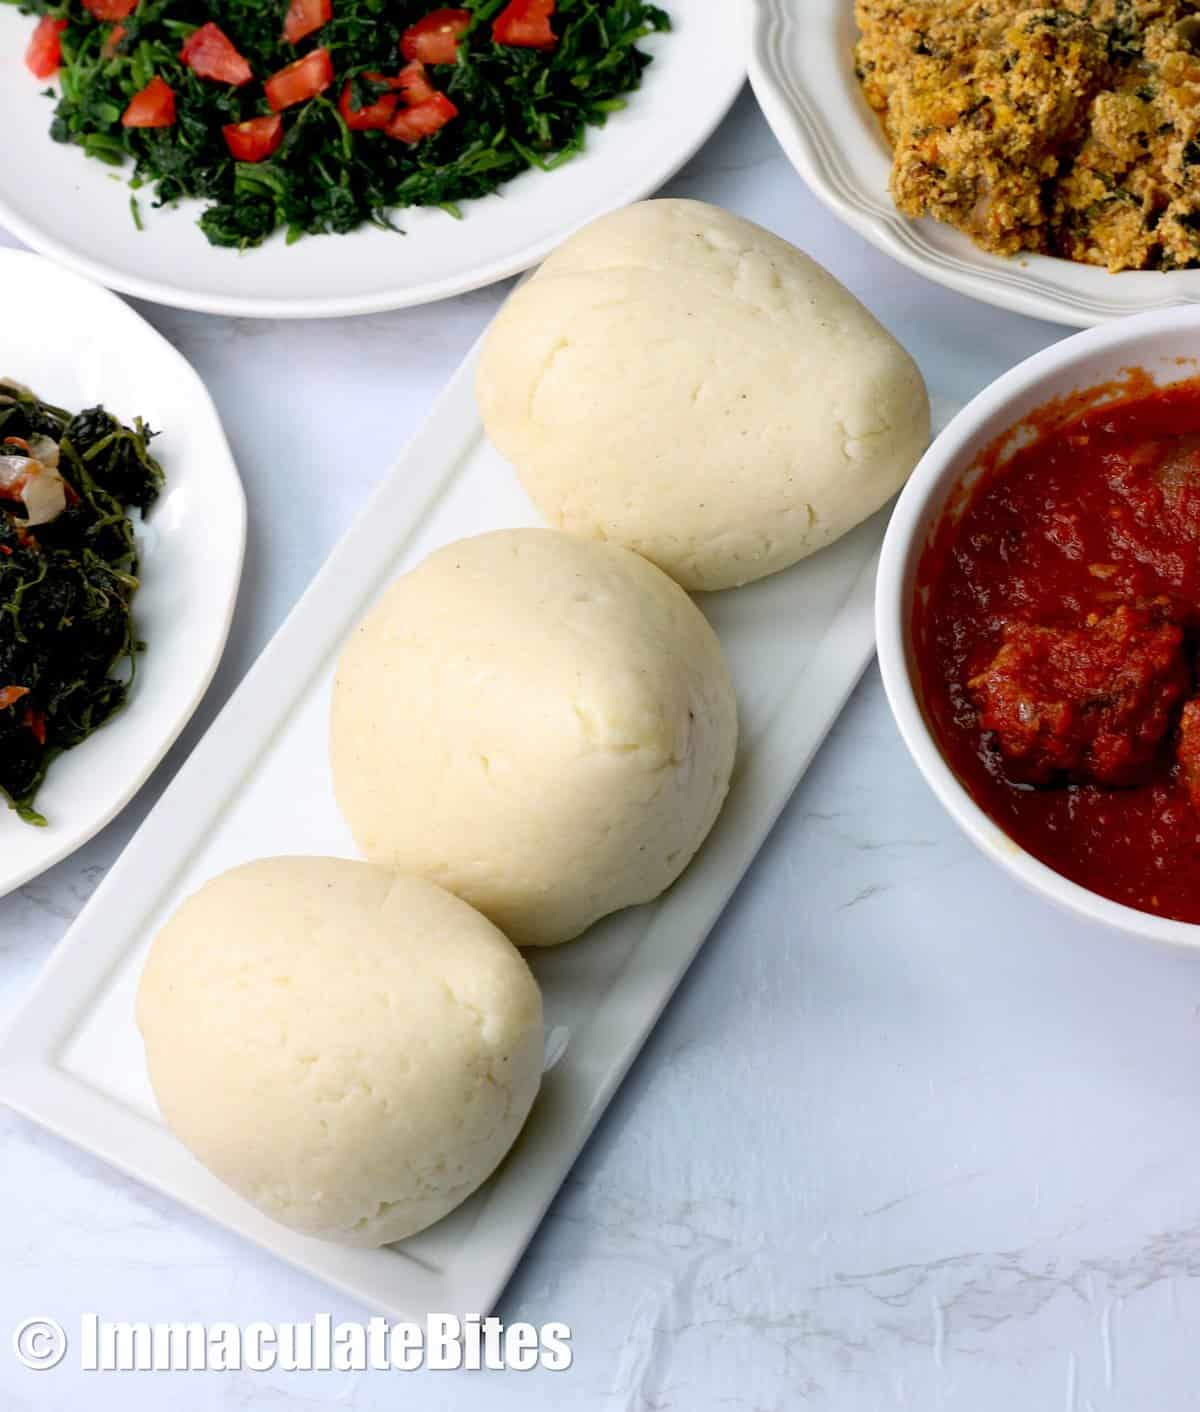 Satisfying Ugali (corn fufu) with traditional African dishes